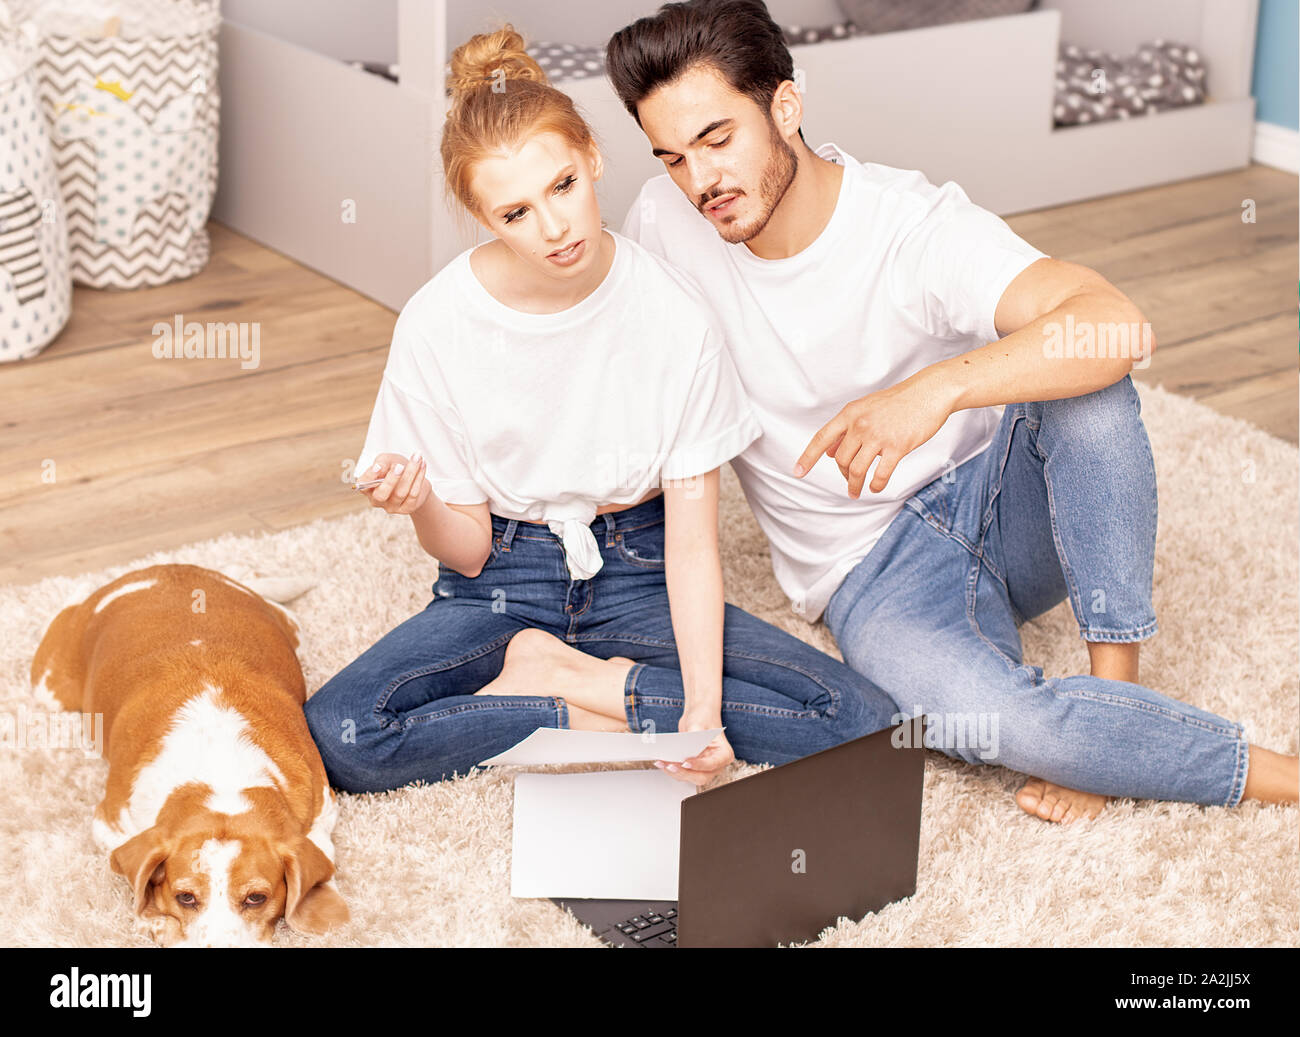 Young couple with cute beagle dog planning to arrange a children's room. Family concept. Stock Photo